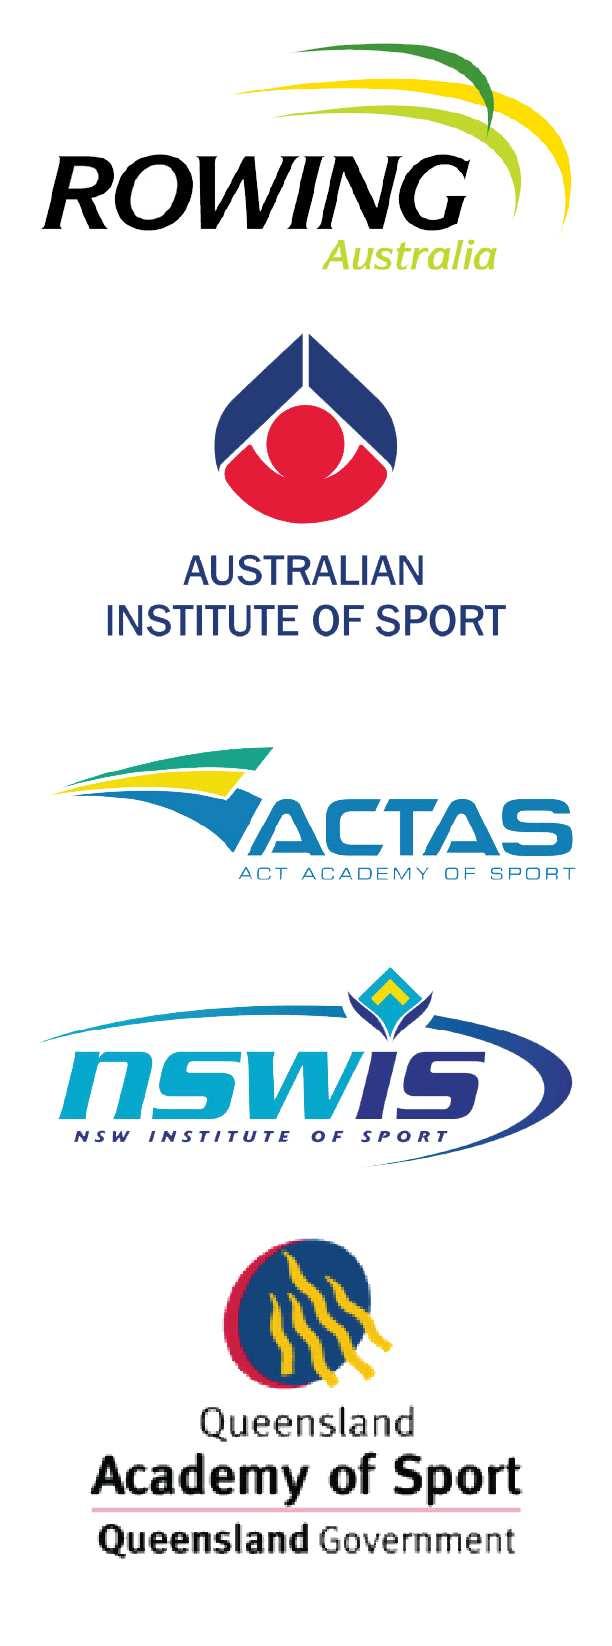 2012/13 INTRODUCTION: The National Rowing Centre of Excellence (NRCE) in association with all Sports Institutes and Academies across Australia (AIS/SIS/SAS) has implemented a High Performance Rowing